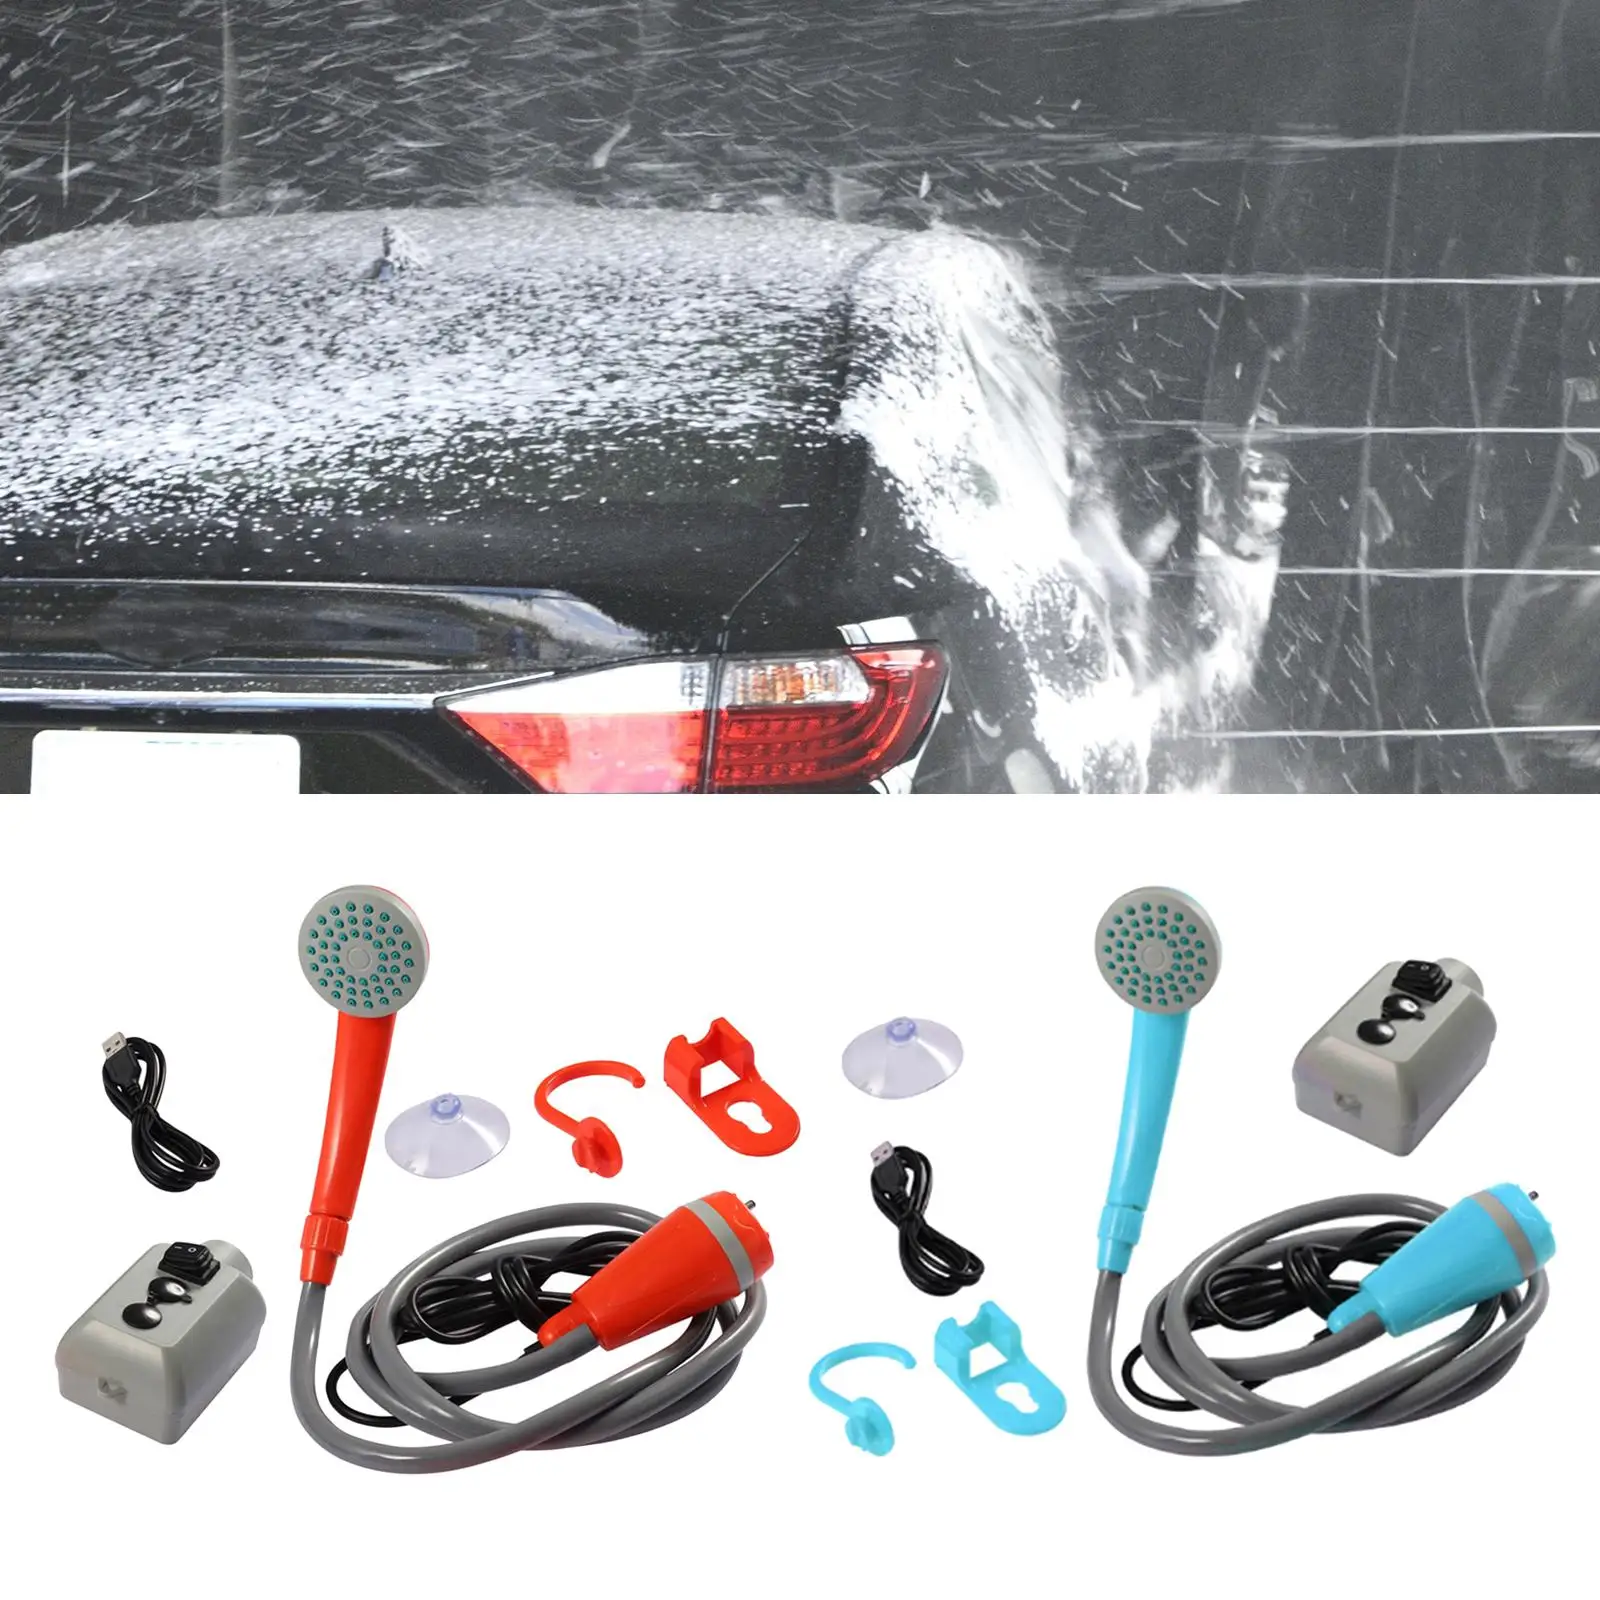 Portable Camping Shower Handheld Compact Rechargeable Pressure Washer for Hiking Car Washing Garden Watering Outdoor Travel